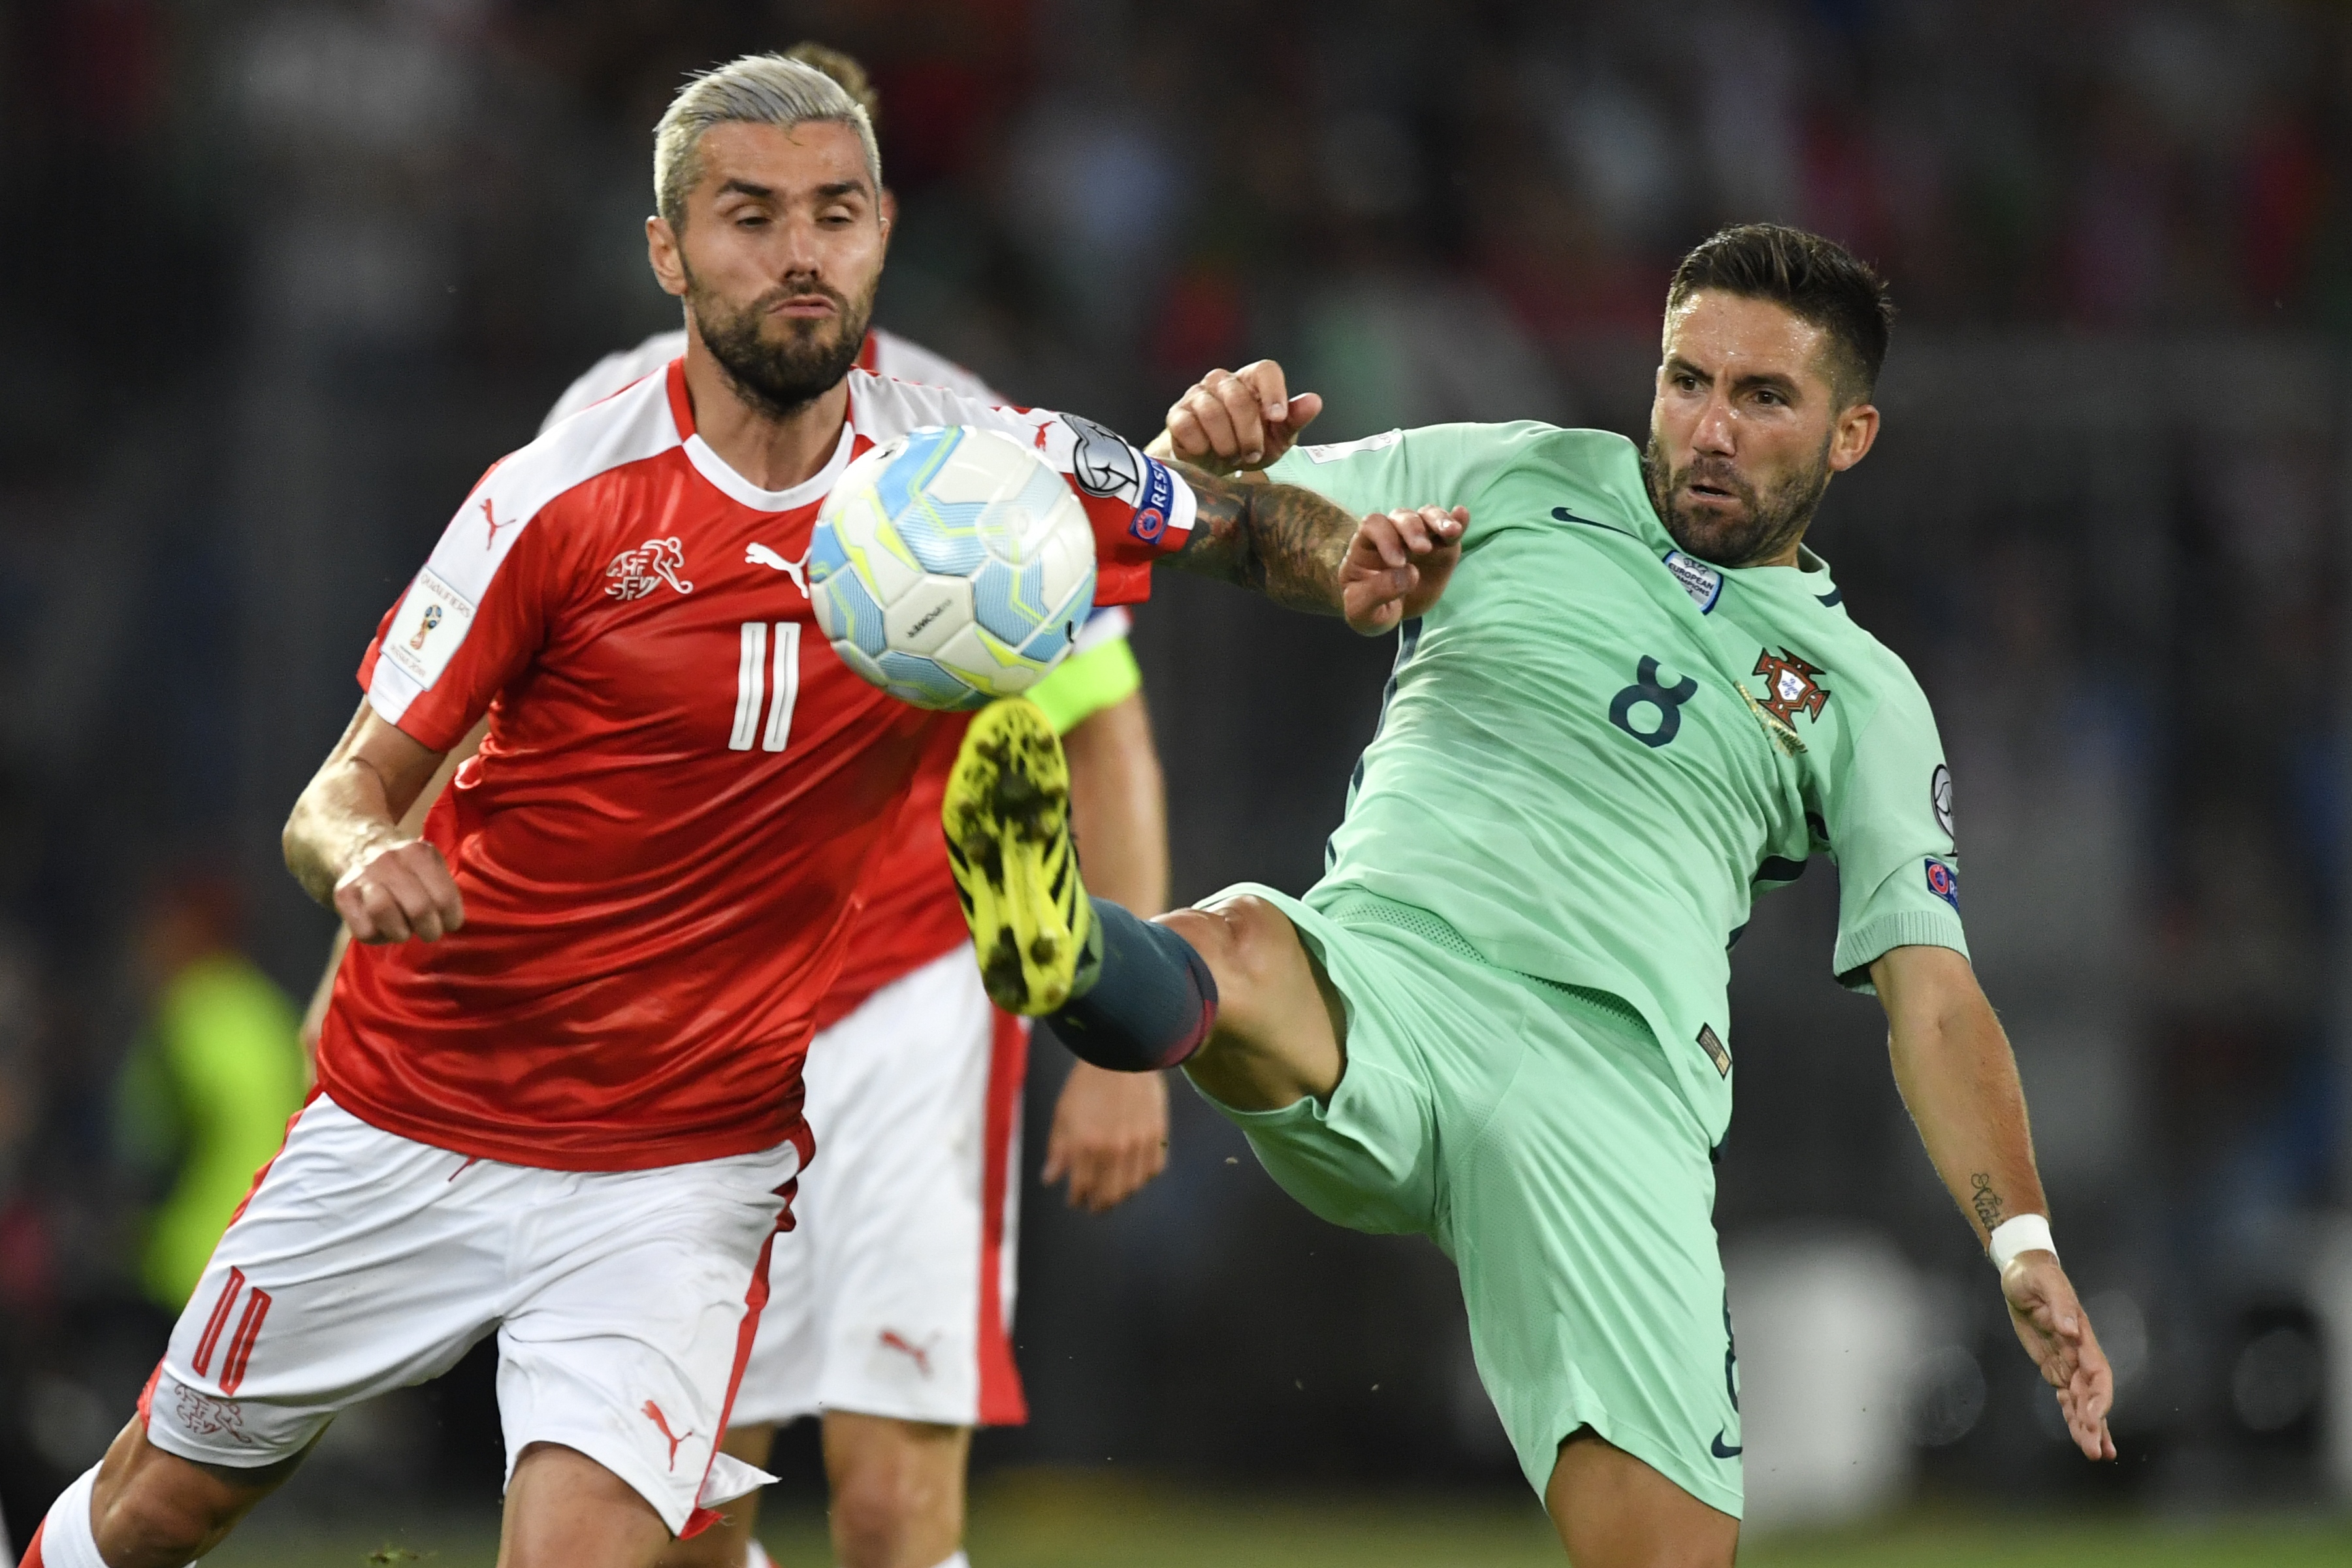 Image result for portugal and switzerland match pic latest